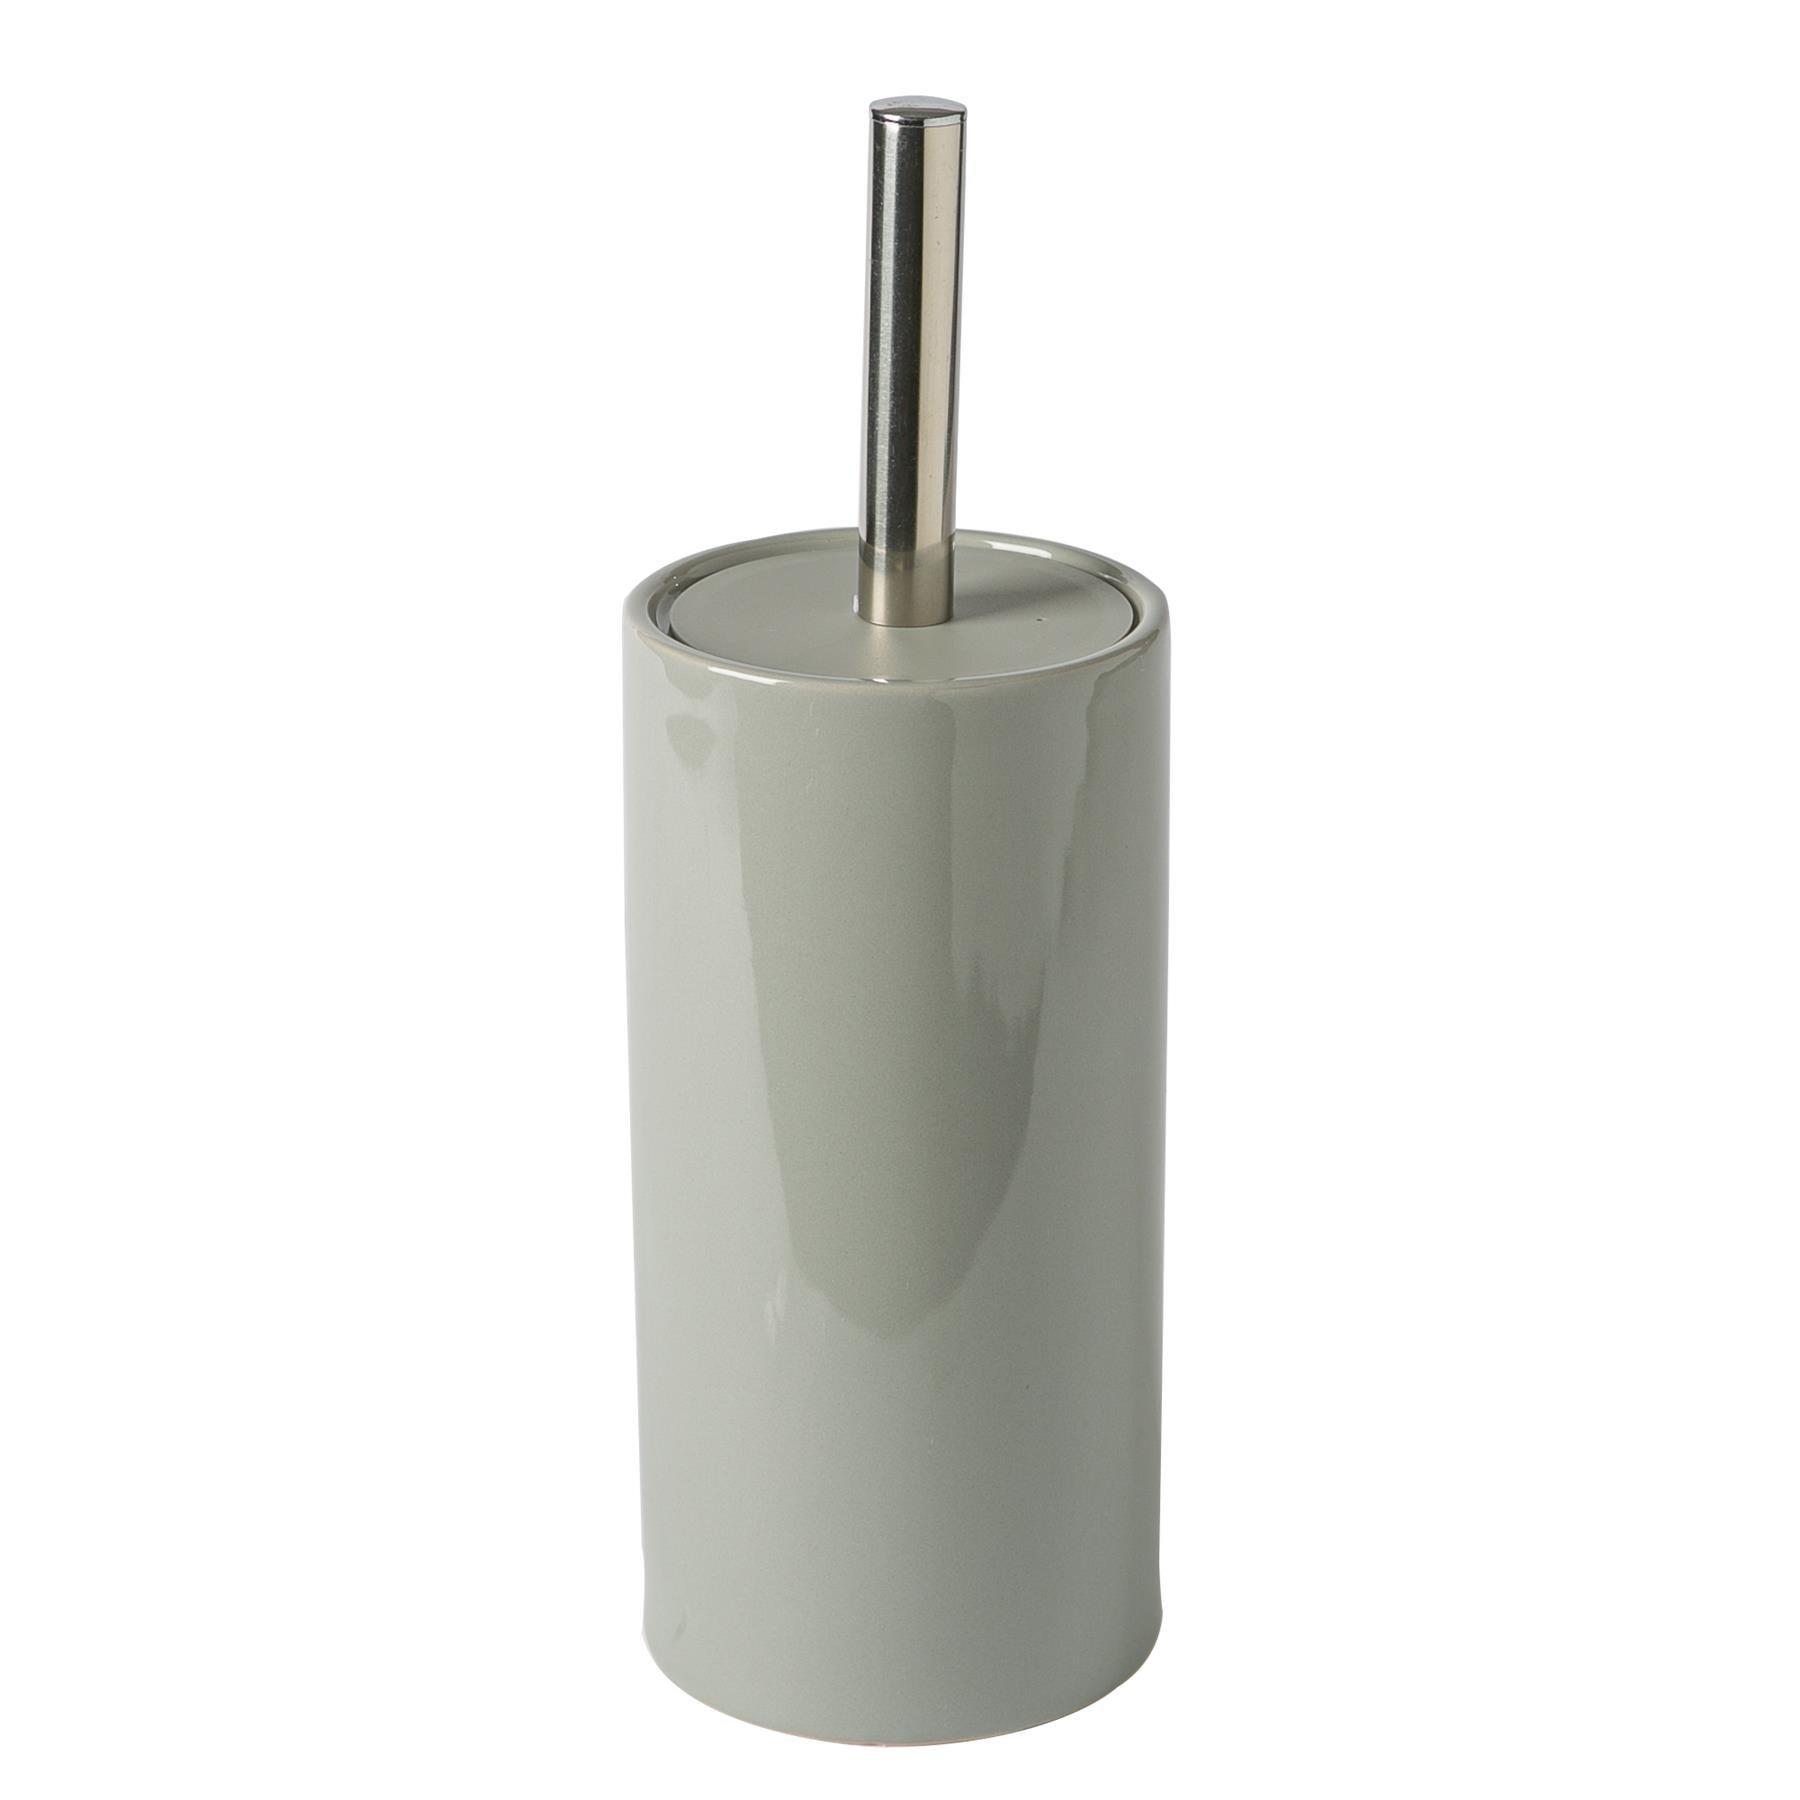 Free Standing Toilet Brush and Holder 